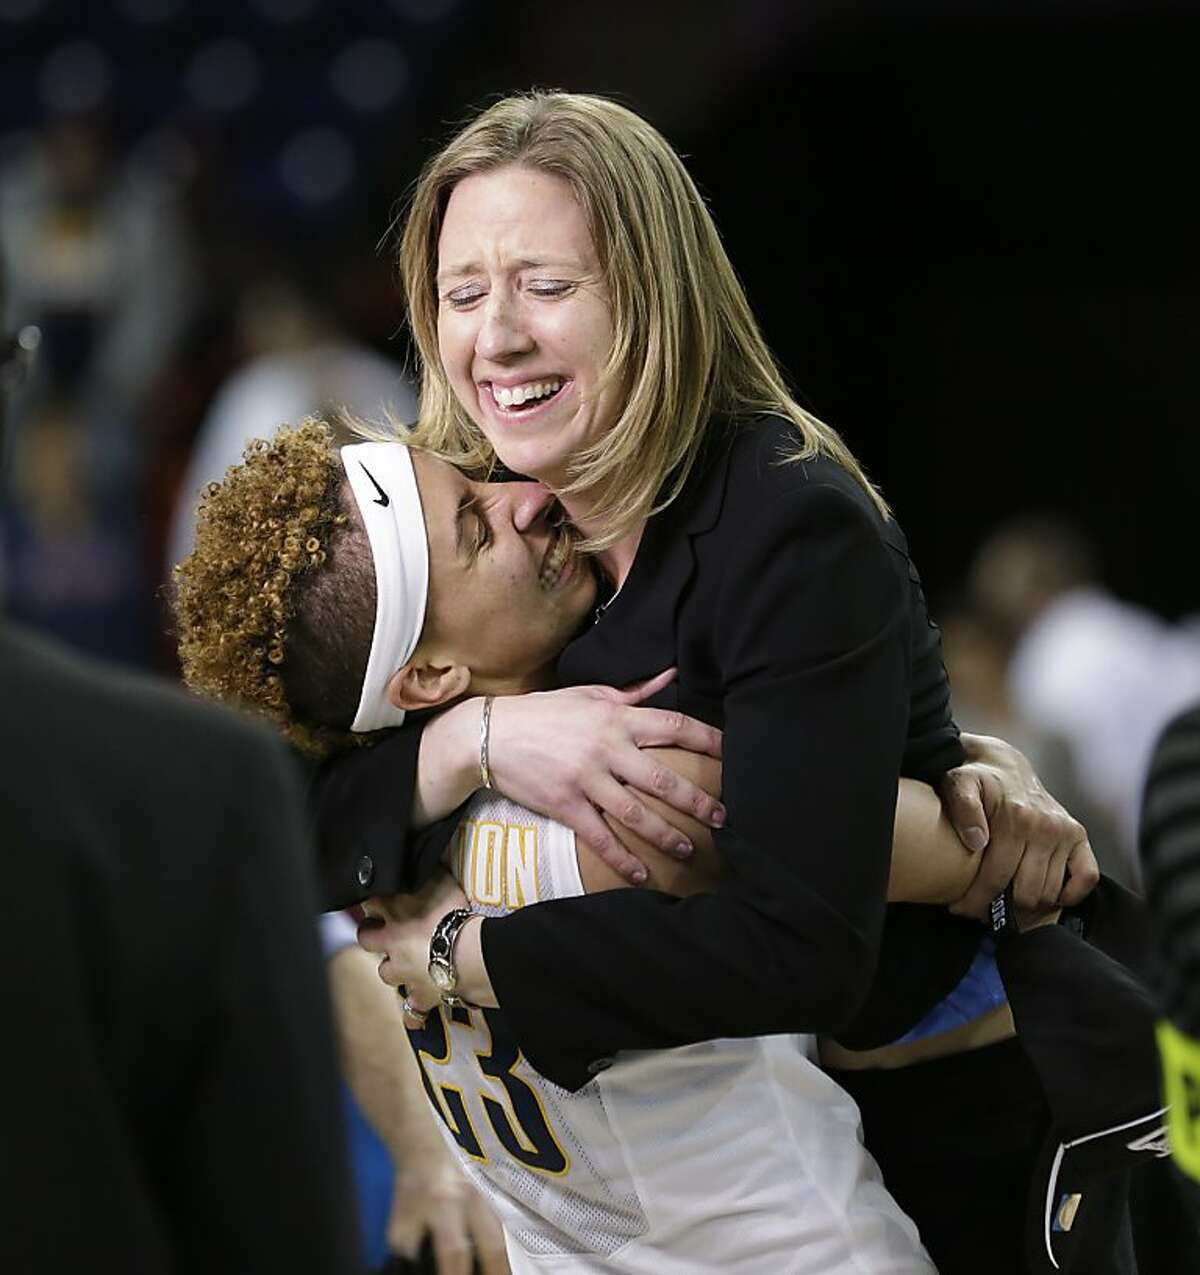 California head coach Lindsay Gottlieb, right, is embraced by Layshia Clarendon after the team beat Georgia in overtime in a regional final in the NCAA women's college basketball tournament, Monday, April 1, 2013, in Spokane, Wash. Cal won 65-62. (AP Photo/Elaine Thompson)